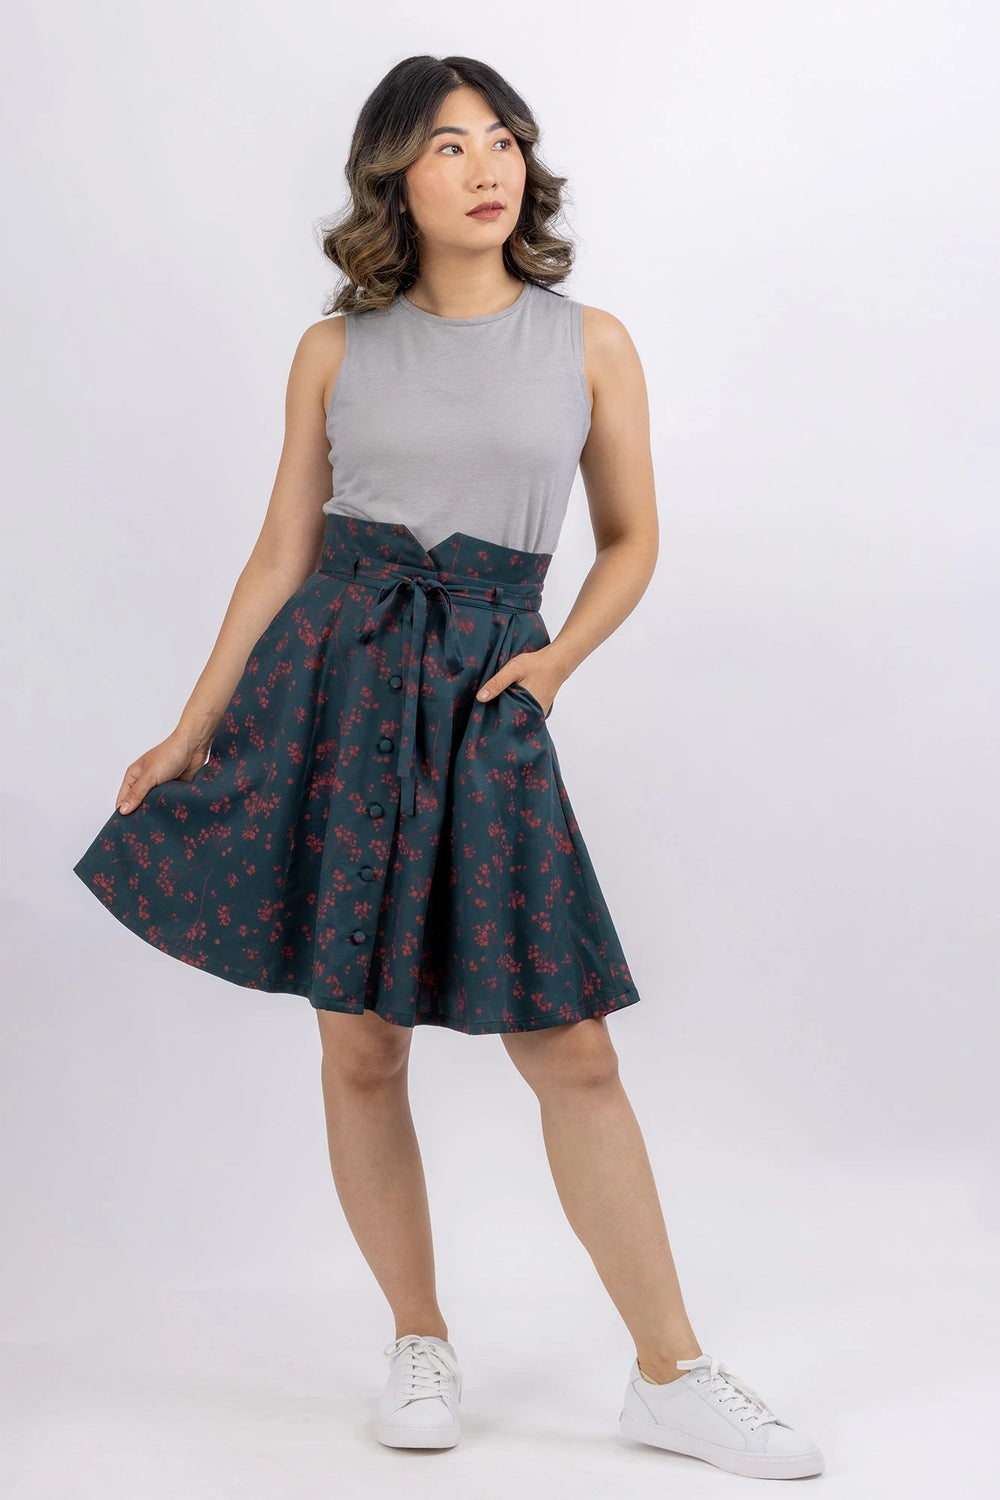 Woman wearing the Natalie Skirt sewing pattern from Forget-me-not Patterns on The Fold Line. A skirt pattern made in cotton chambray, cotton voile, linen, denim or stable viscose/rayon fabrics, featuring a button-front, gored style lines, slash pockets, r